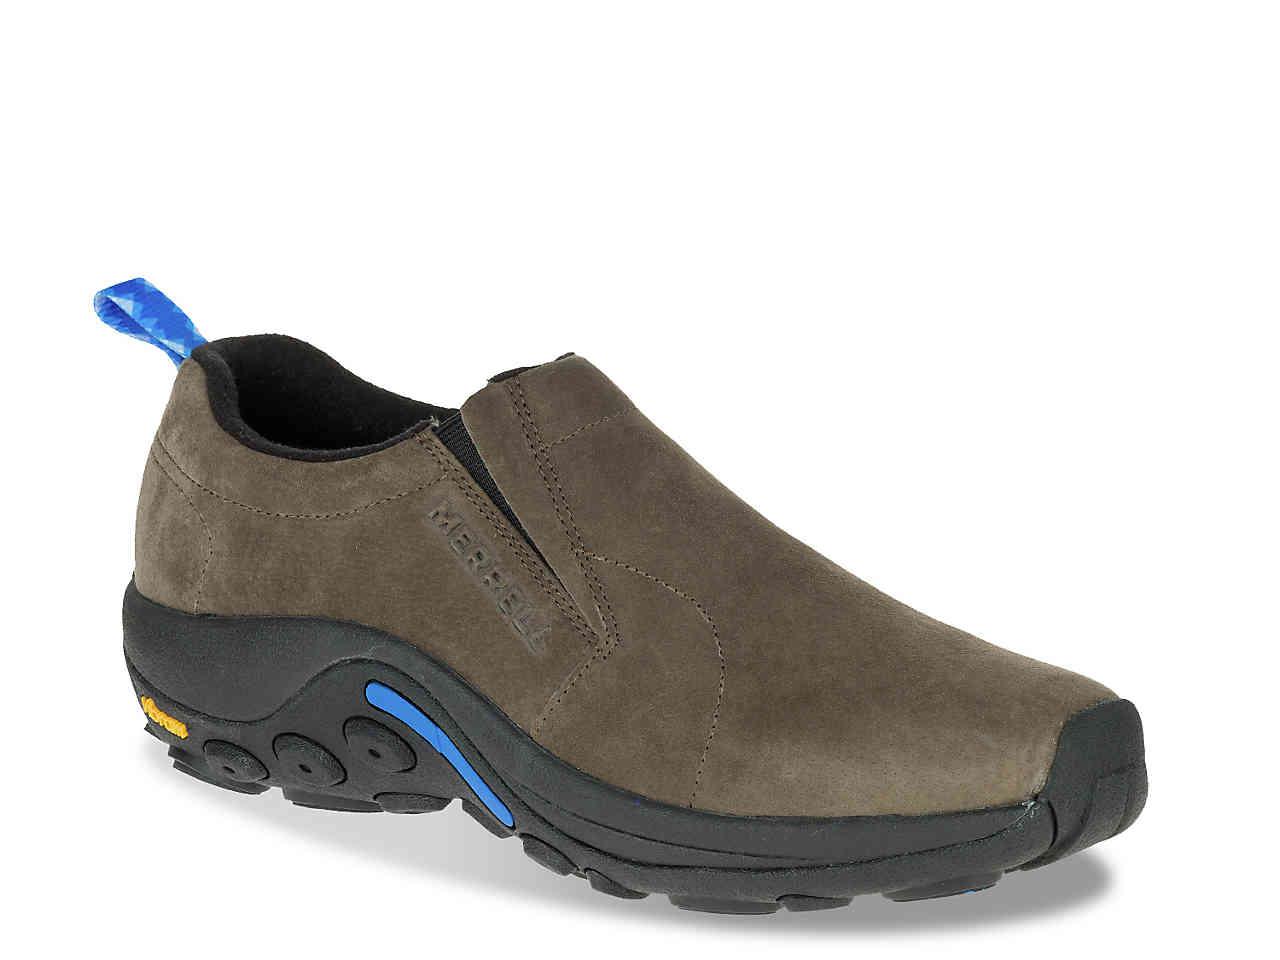 Merrell Leather Jungle Moc Ice+ Slip-on Trail Shoe in Grey (Gray) for ...